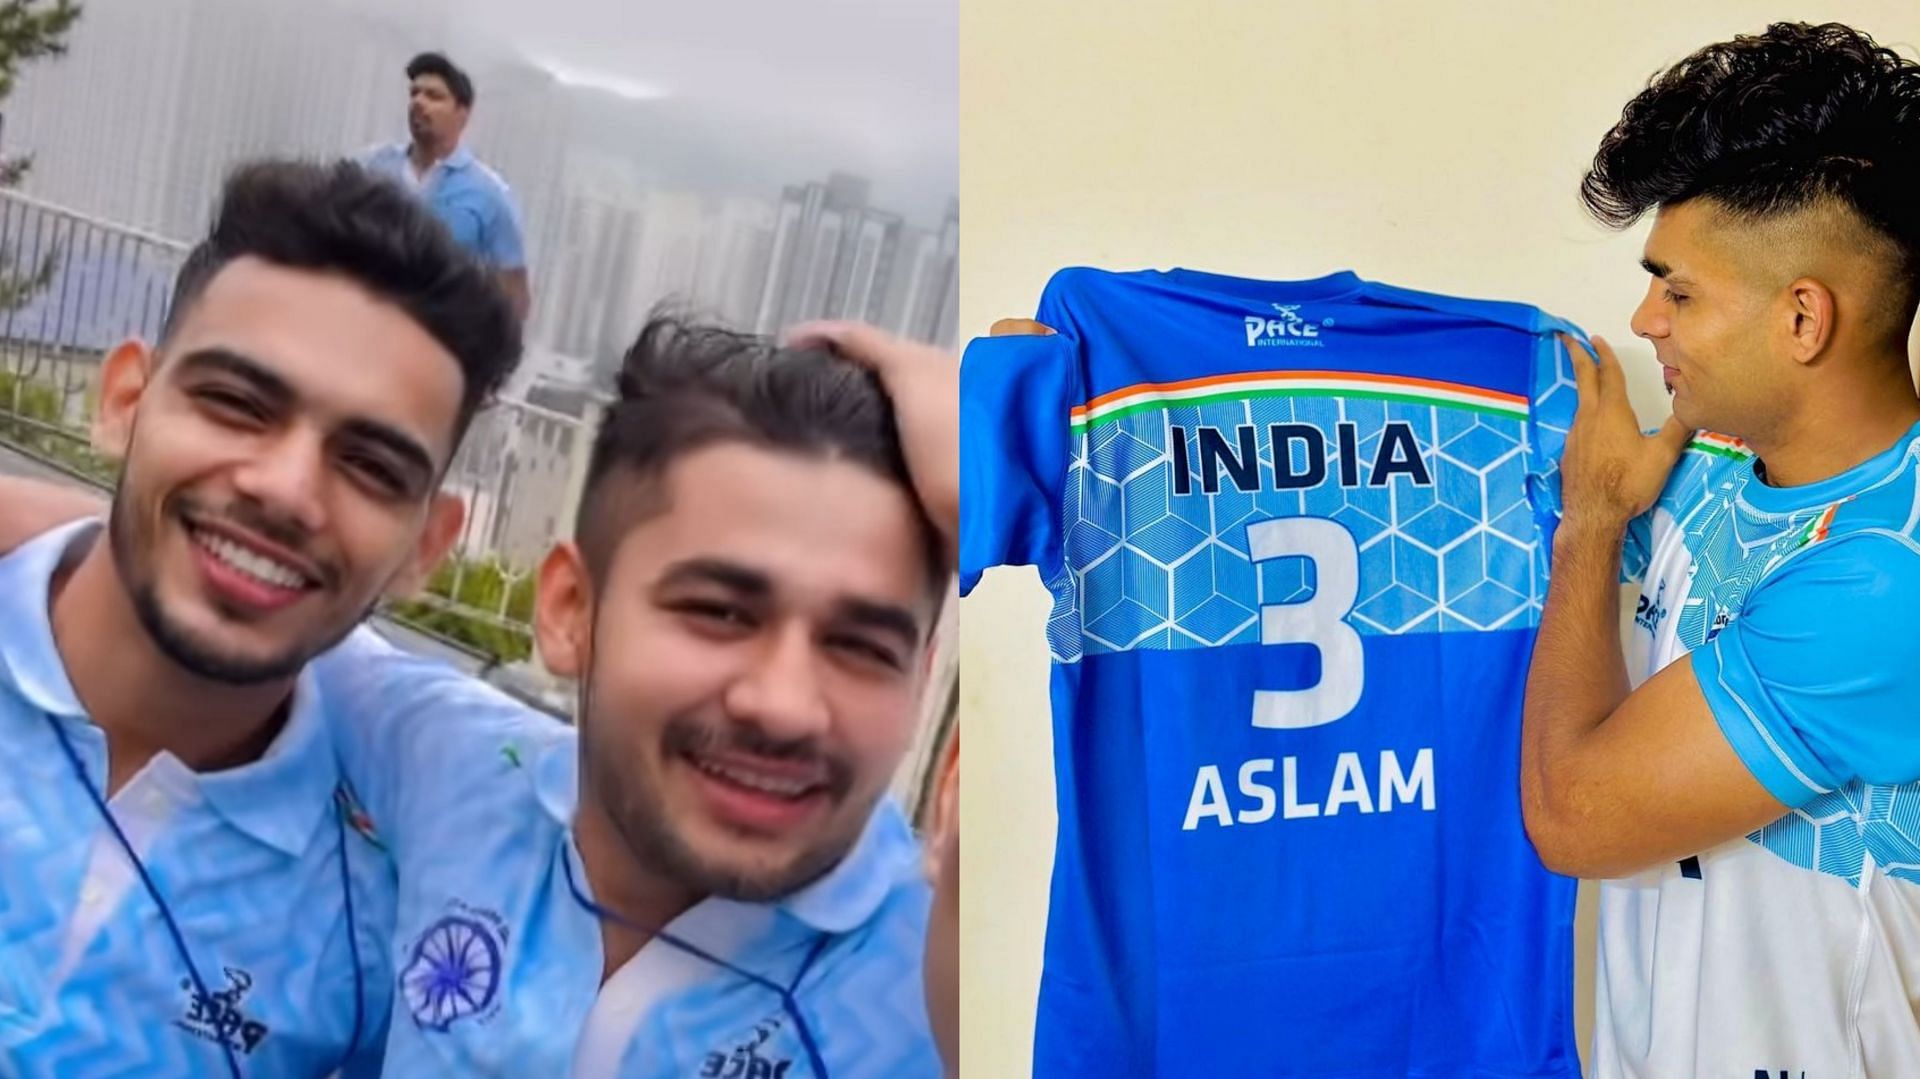 India have sent a young squad to Busan for Asian Kabaddi Championships (Image: Instagram)